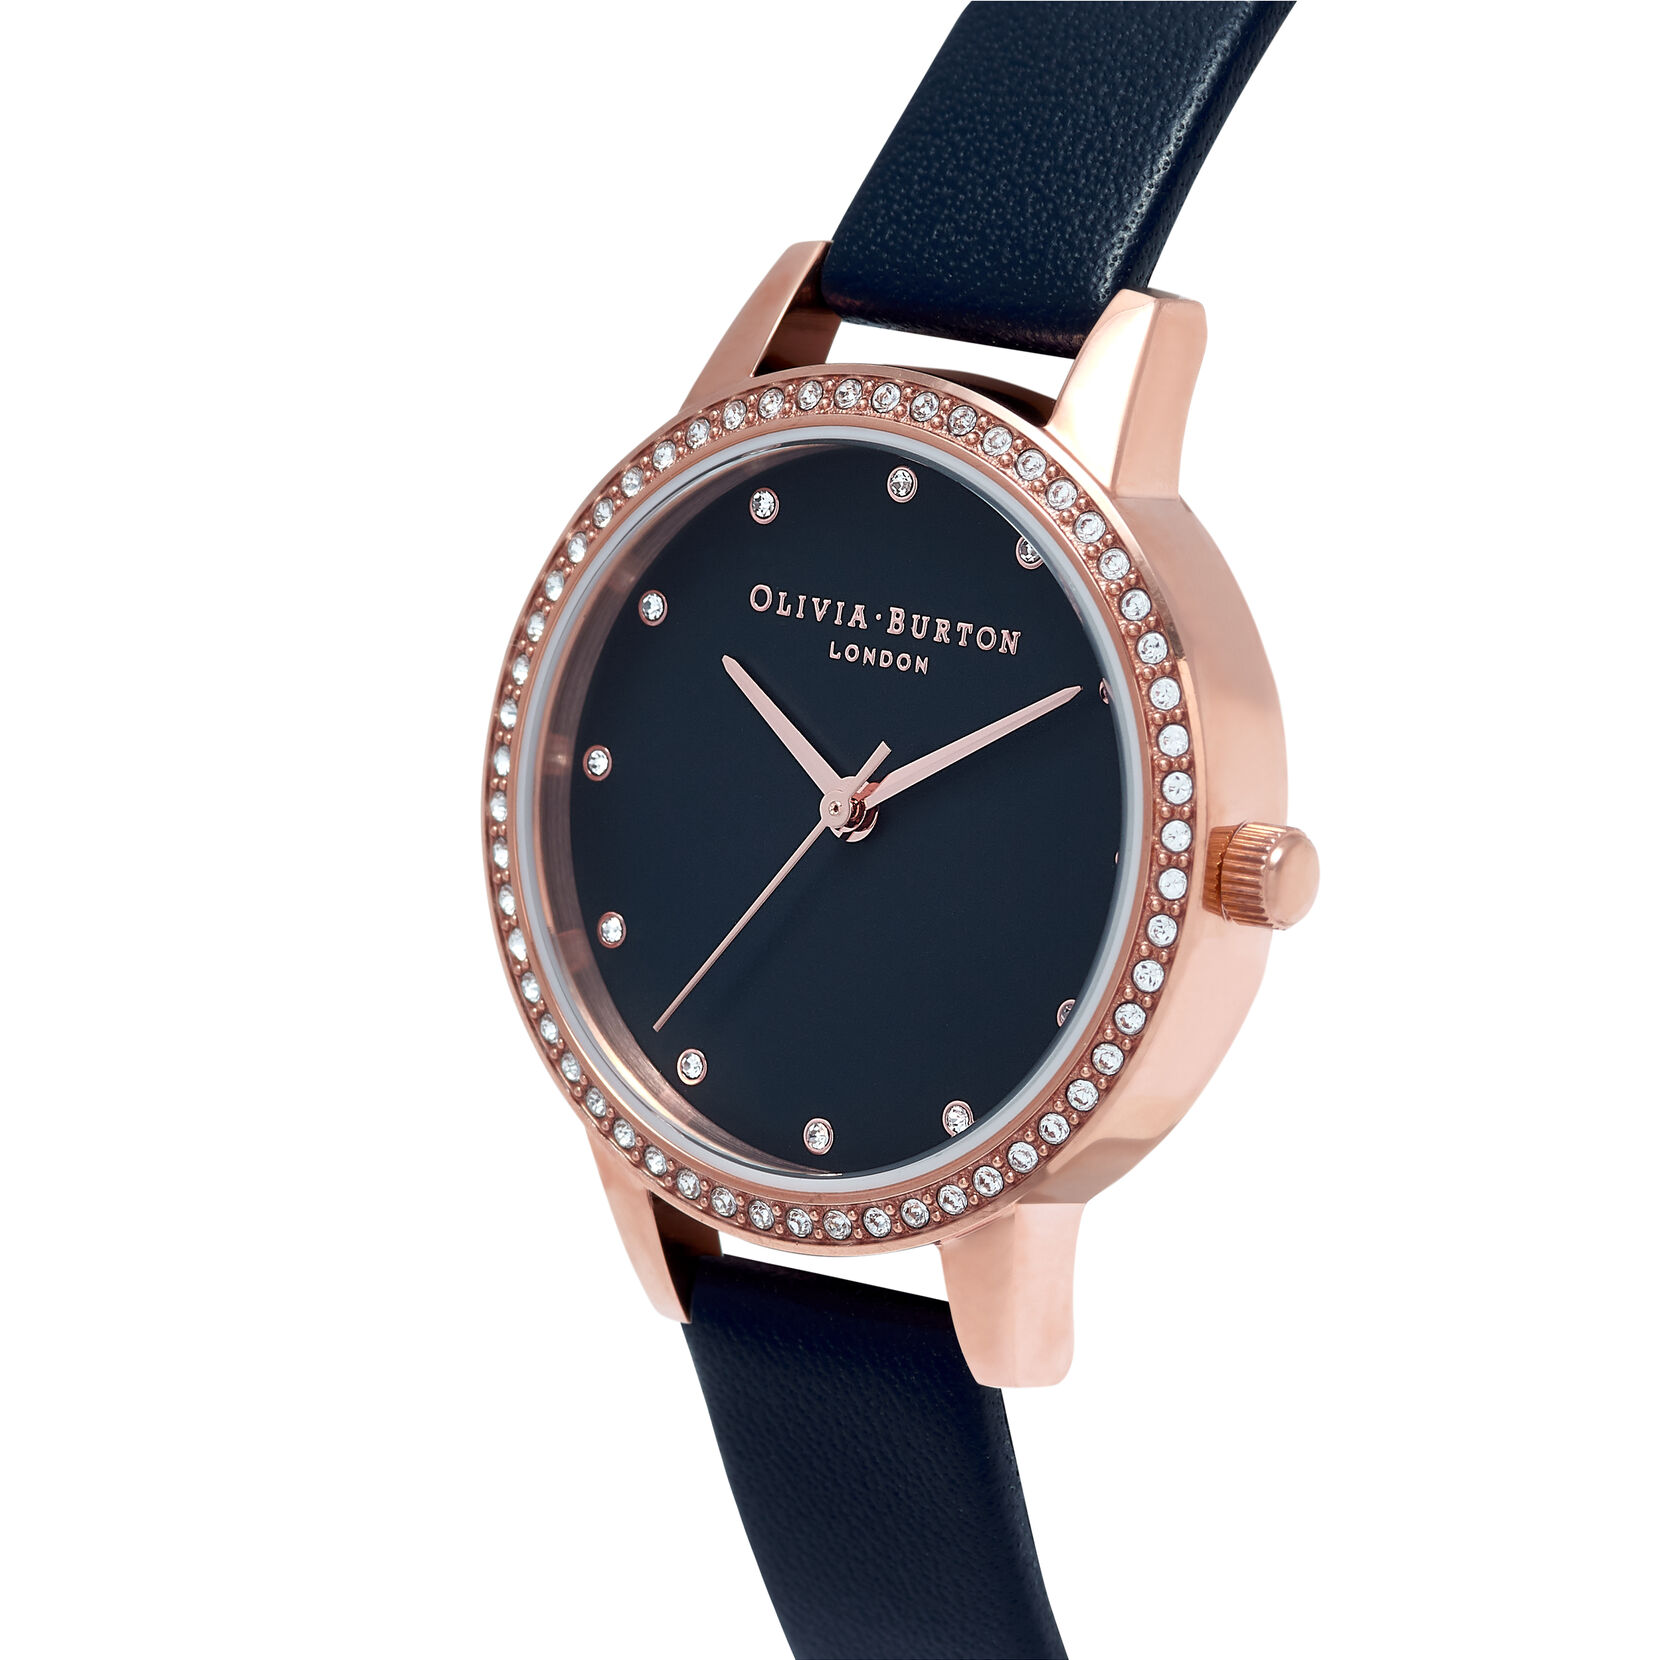 Midi Navy Mother Of Pearl Sparkle Bezel, Rose Gold & Navy Watch